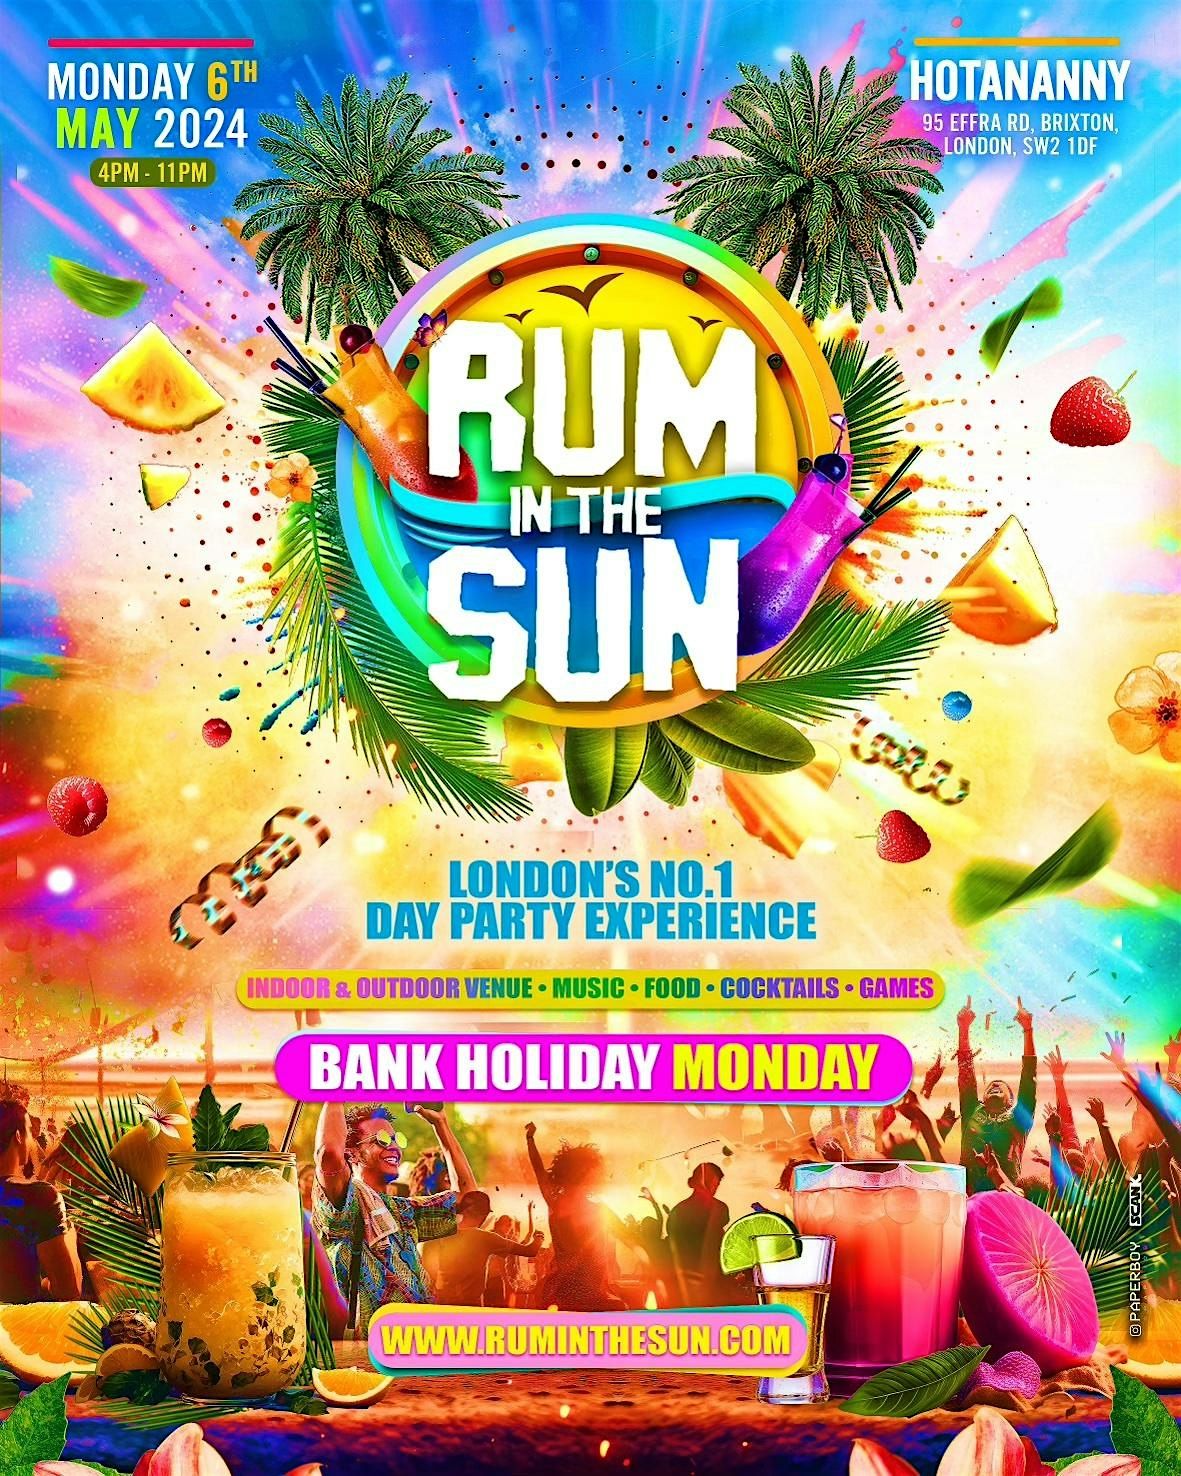 RUM IN THE SUN - London's Ultimate Bank Holiday Day Party Experience